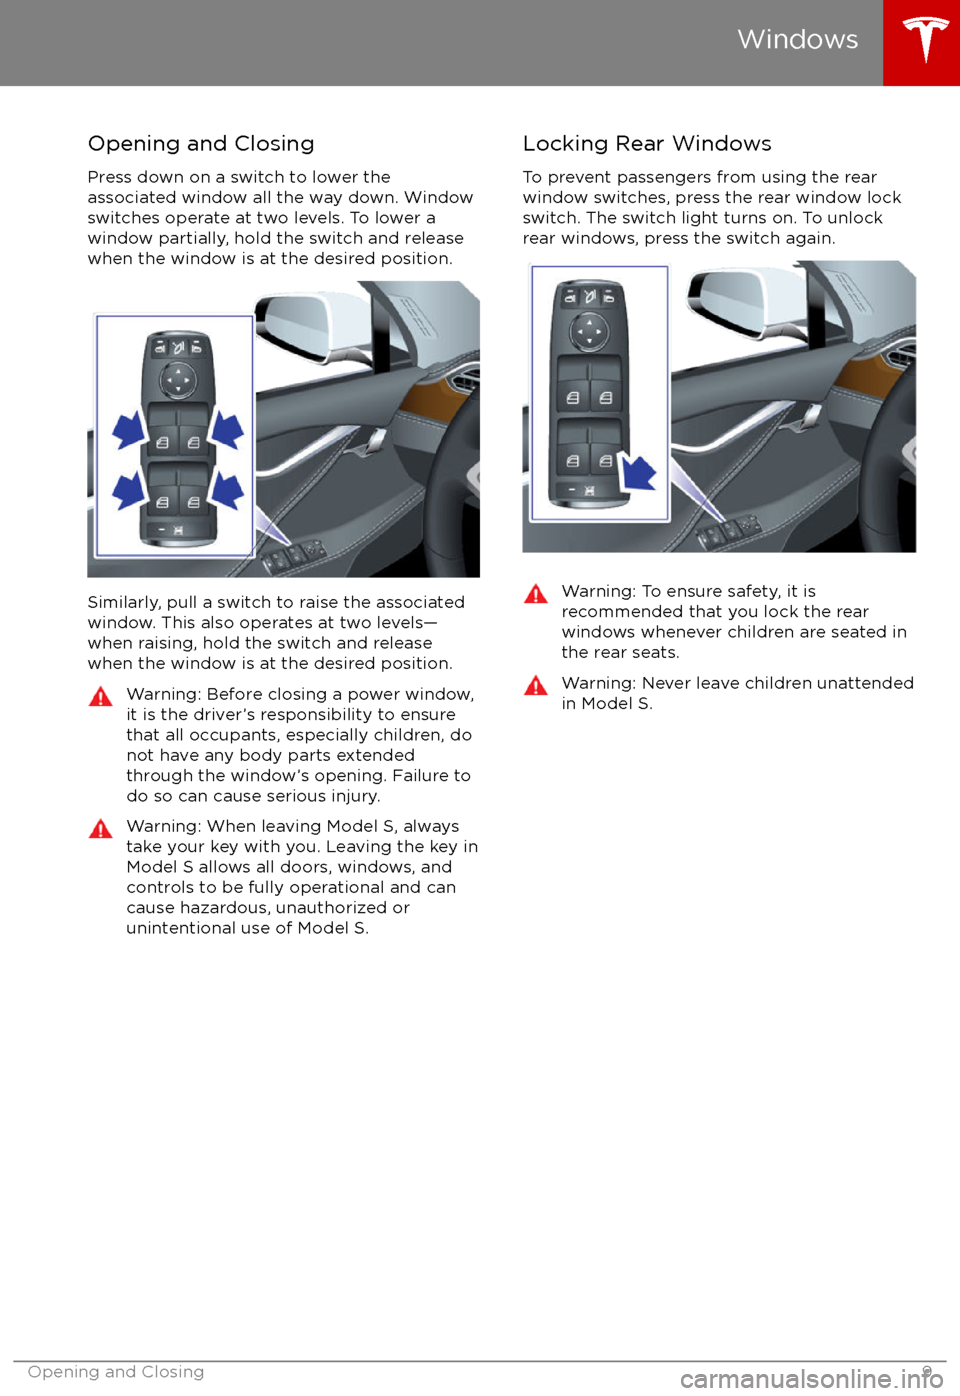 TESLA MODEL S 2017  Owners Manual Opening and Closing
Press down on a switch to lower the
associated window all the way down. Window
switches operate at two levels. To lower a
window partially, hold the switch and release
when the win